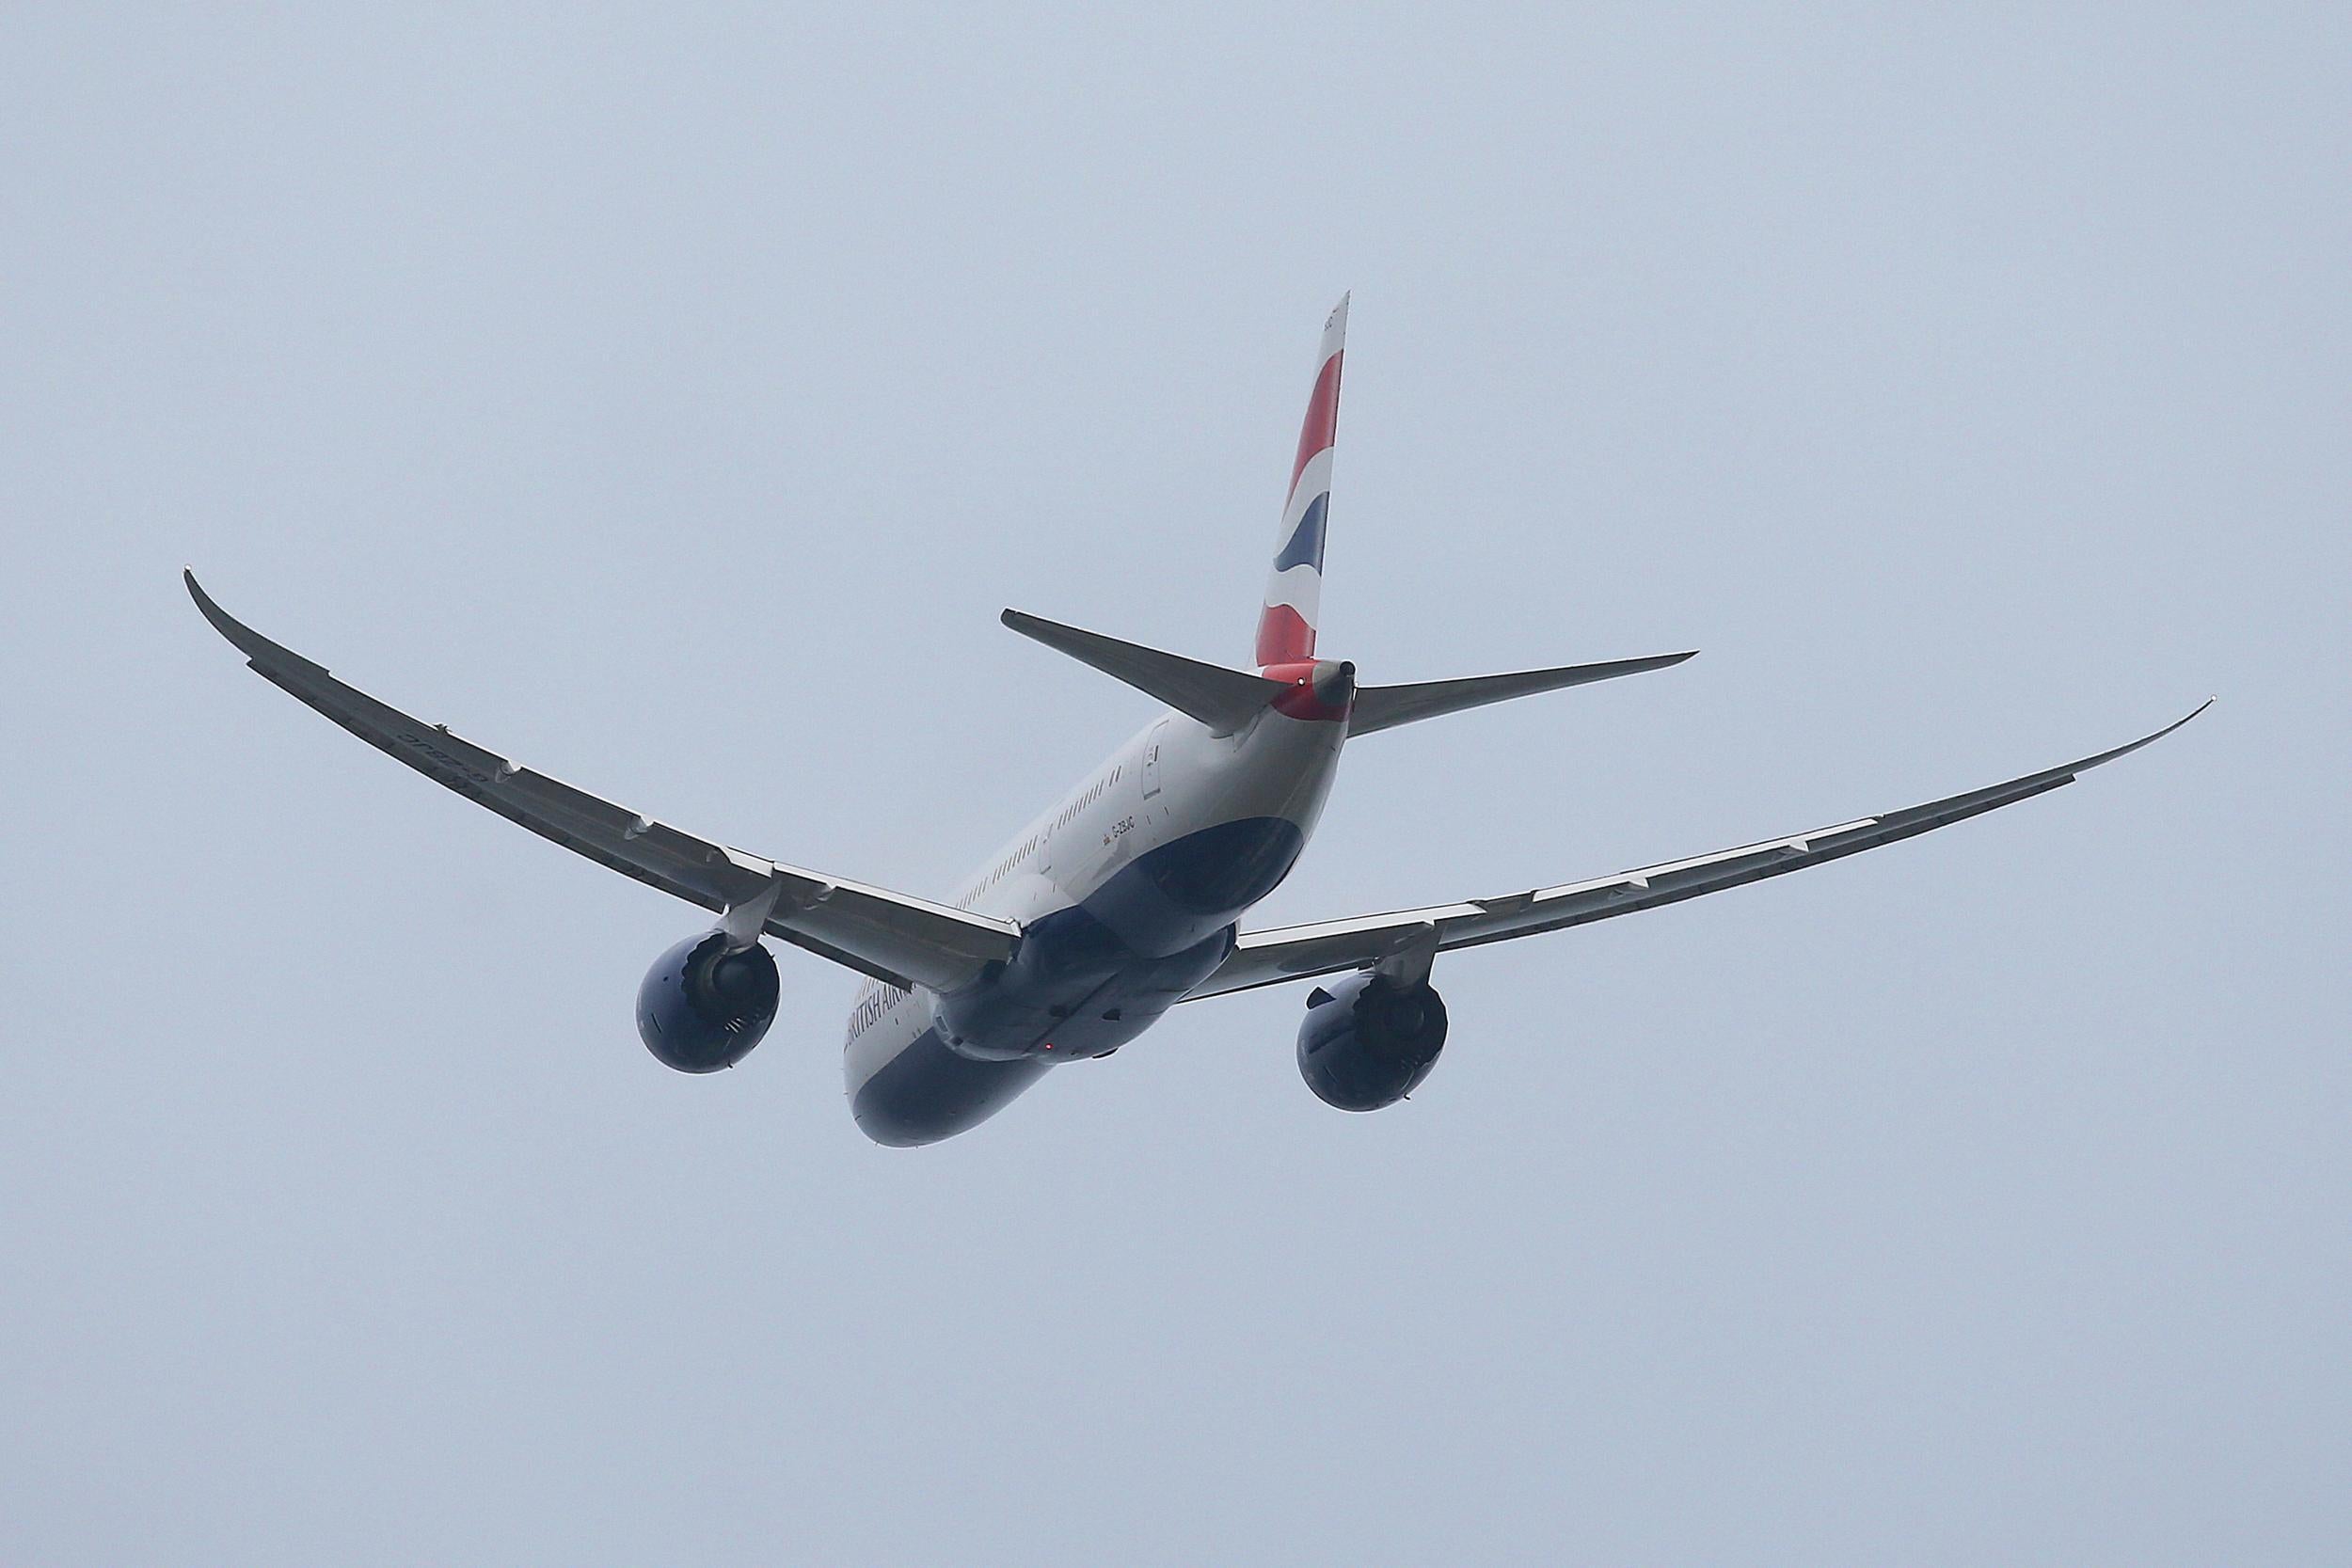 BA has angered customers by cancelling 'manifestly incorrect' fares